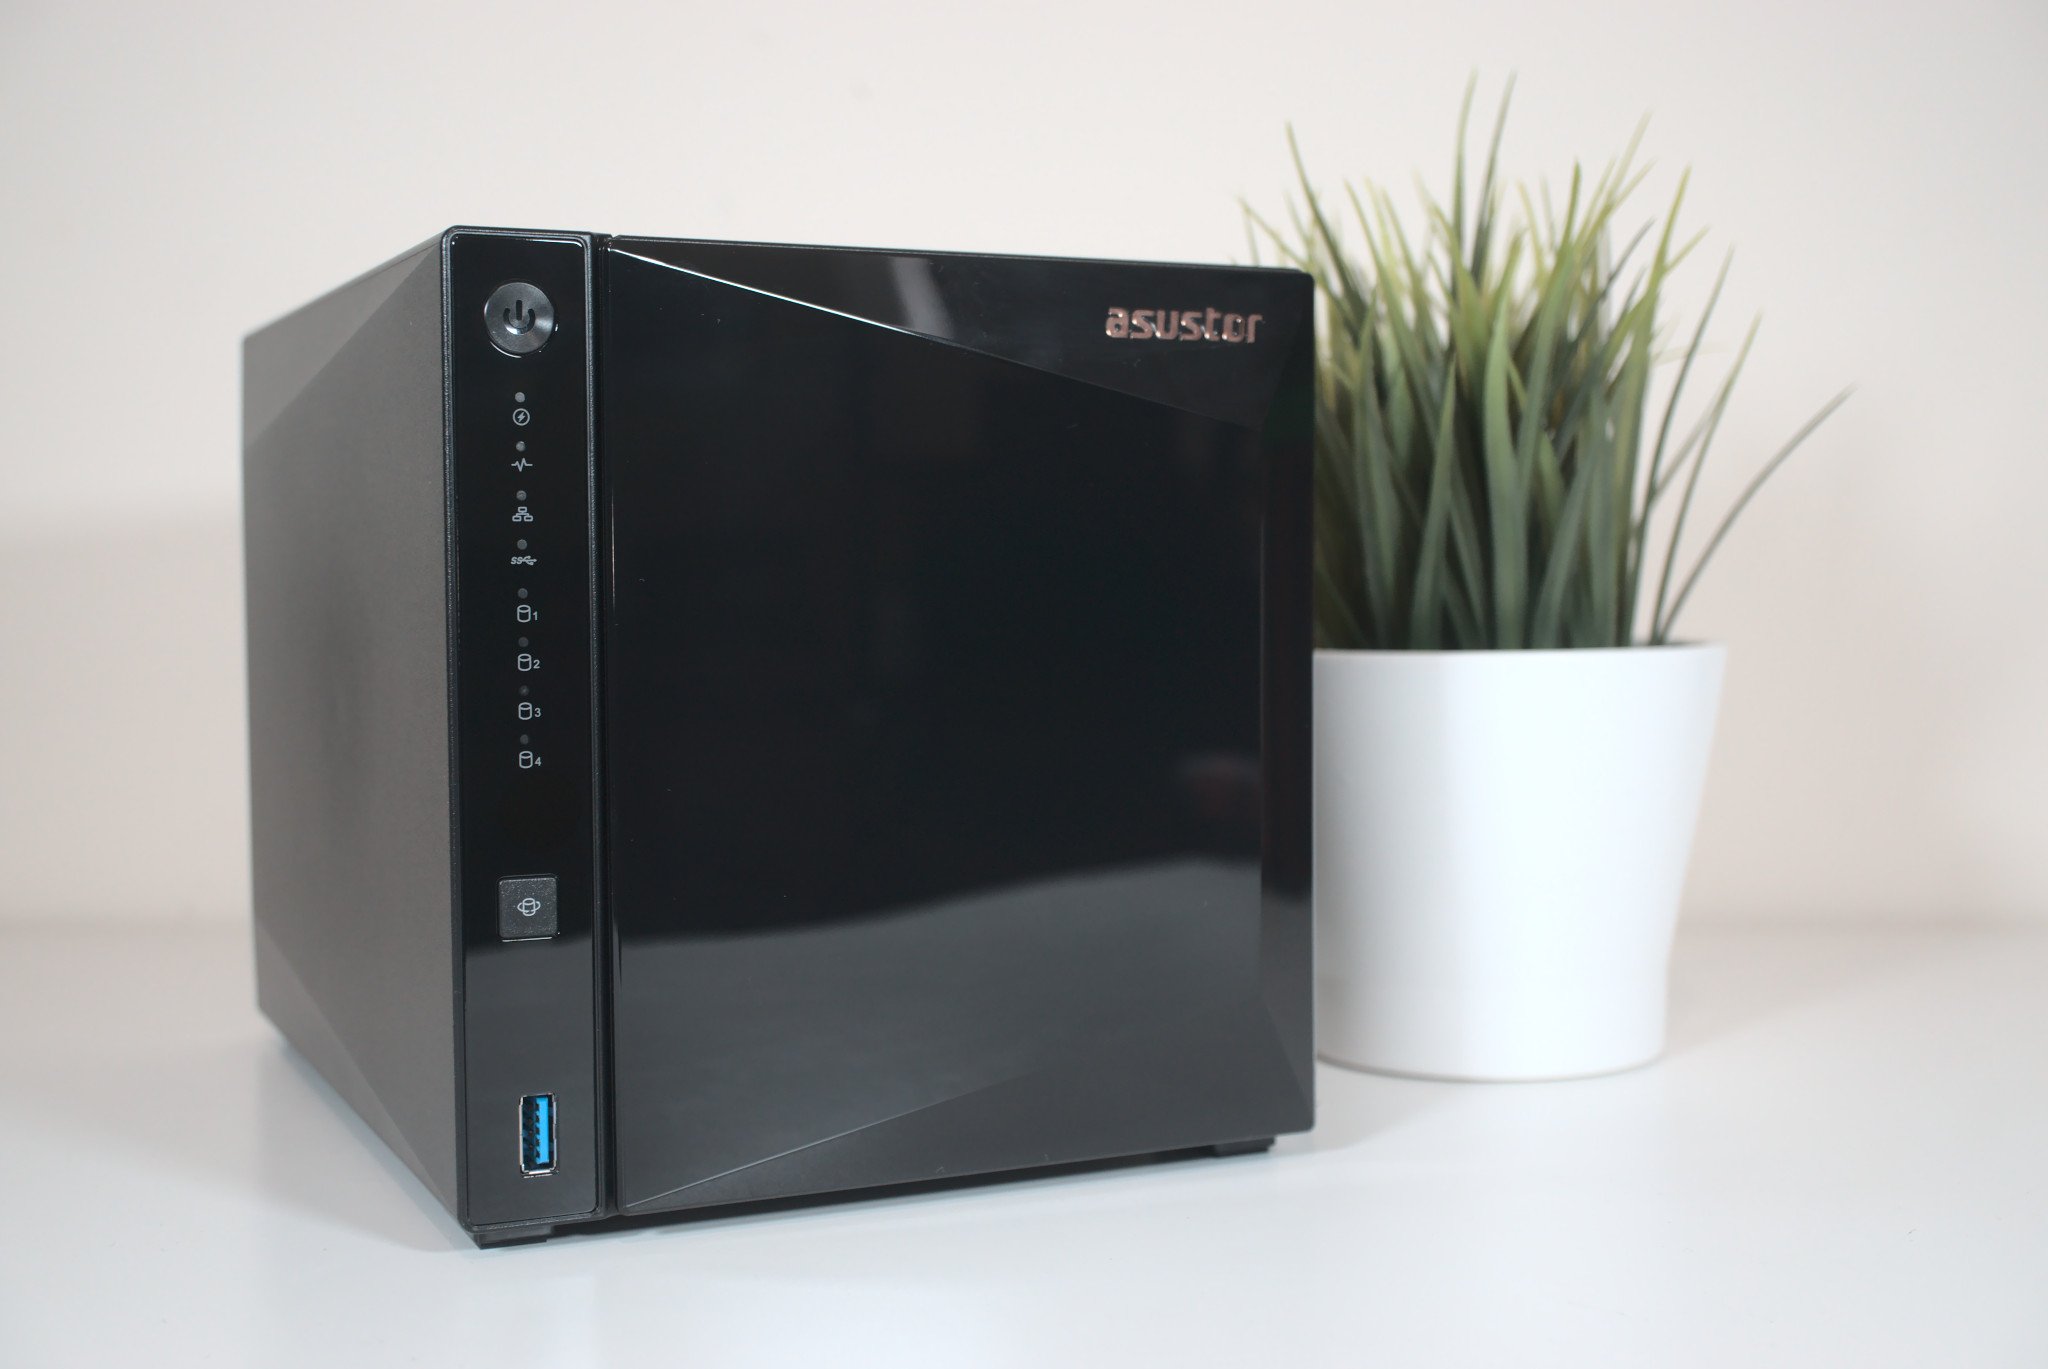 ASUSTOR DRIVESTOR 4 Pro (AS3304T) NAS review: Fancy some cloud